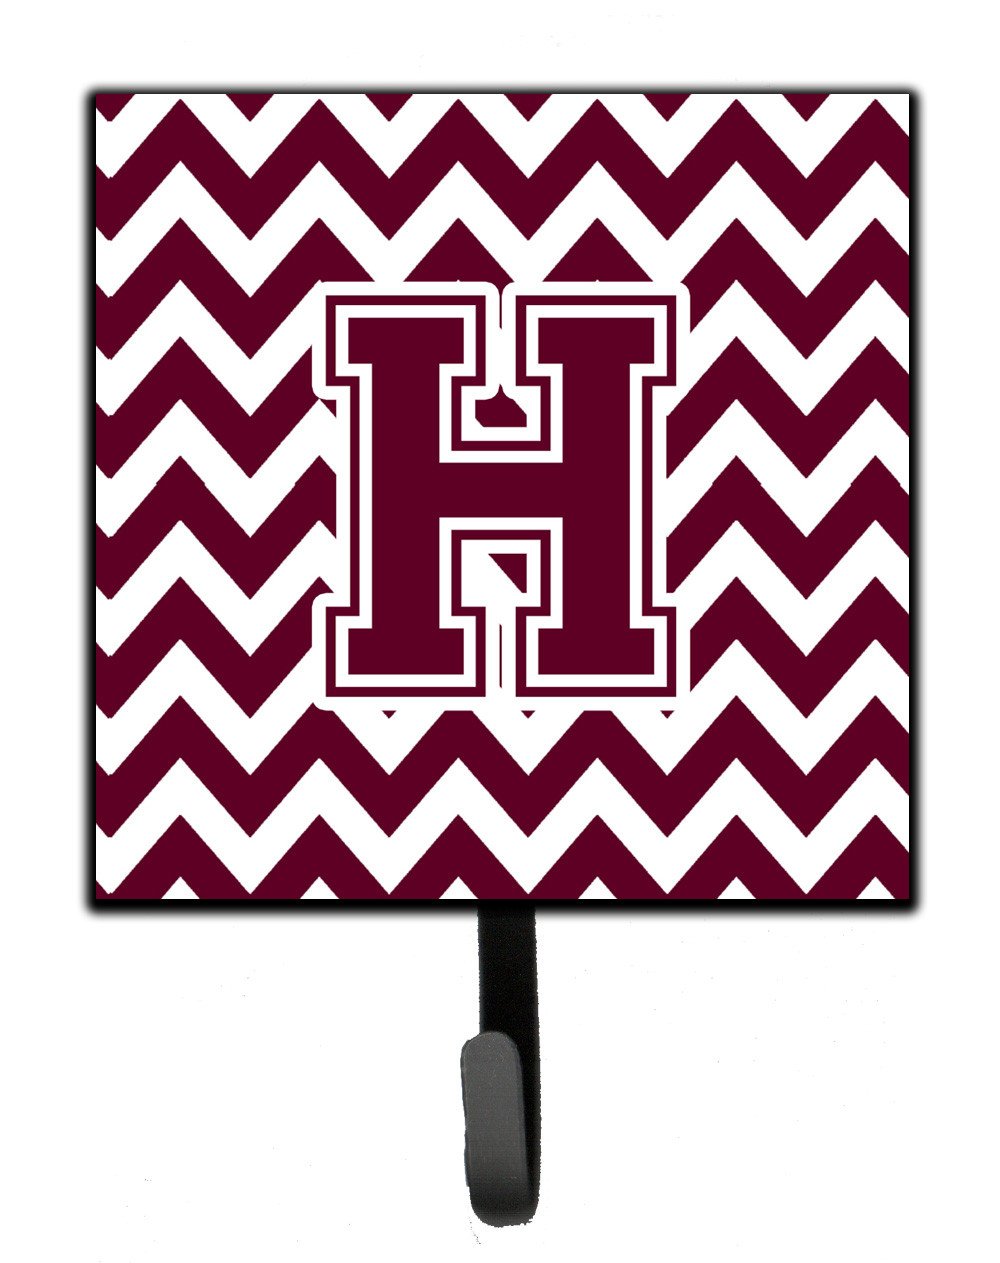 Letter H Chevron Maroon and White  Leash or Key Holder CJ1051-HSH4 by Caroline's Treasures